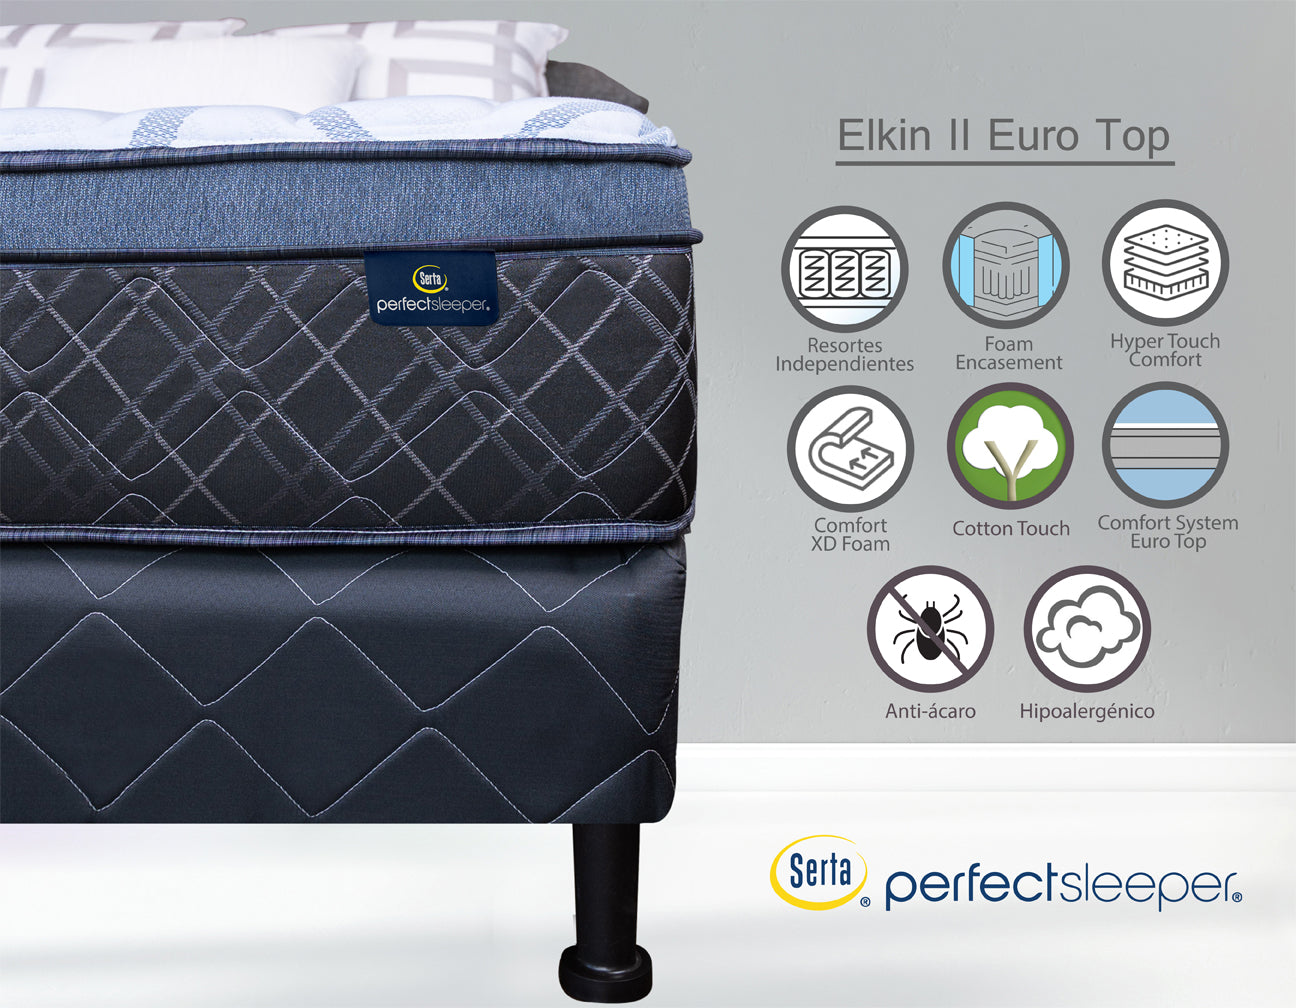 Serta Perfect Sleeper Elkin ll Euro Top Firm New Collections (Reforzados)